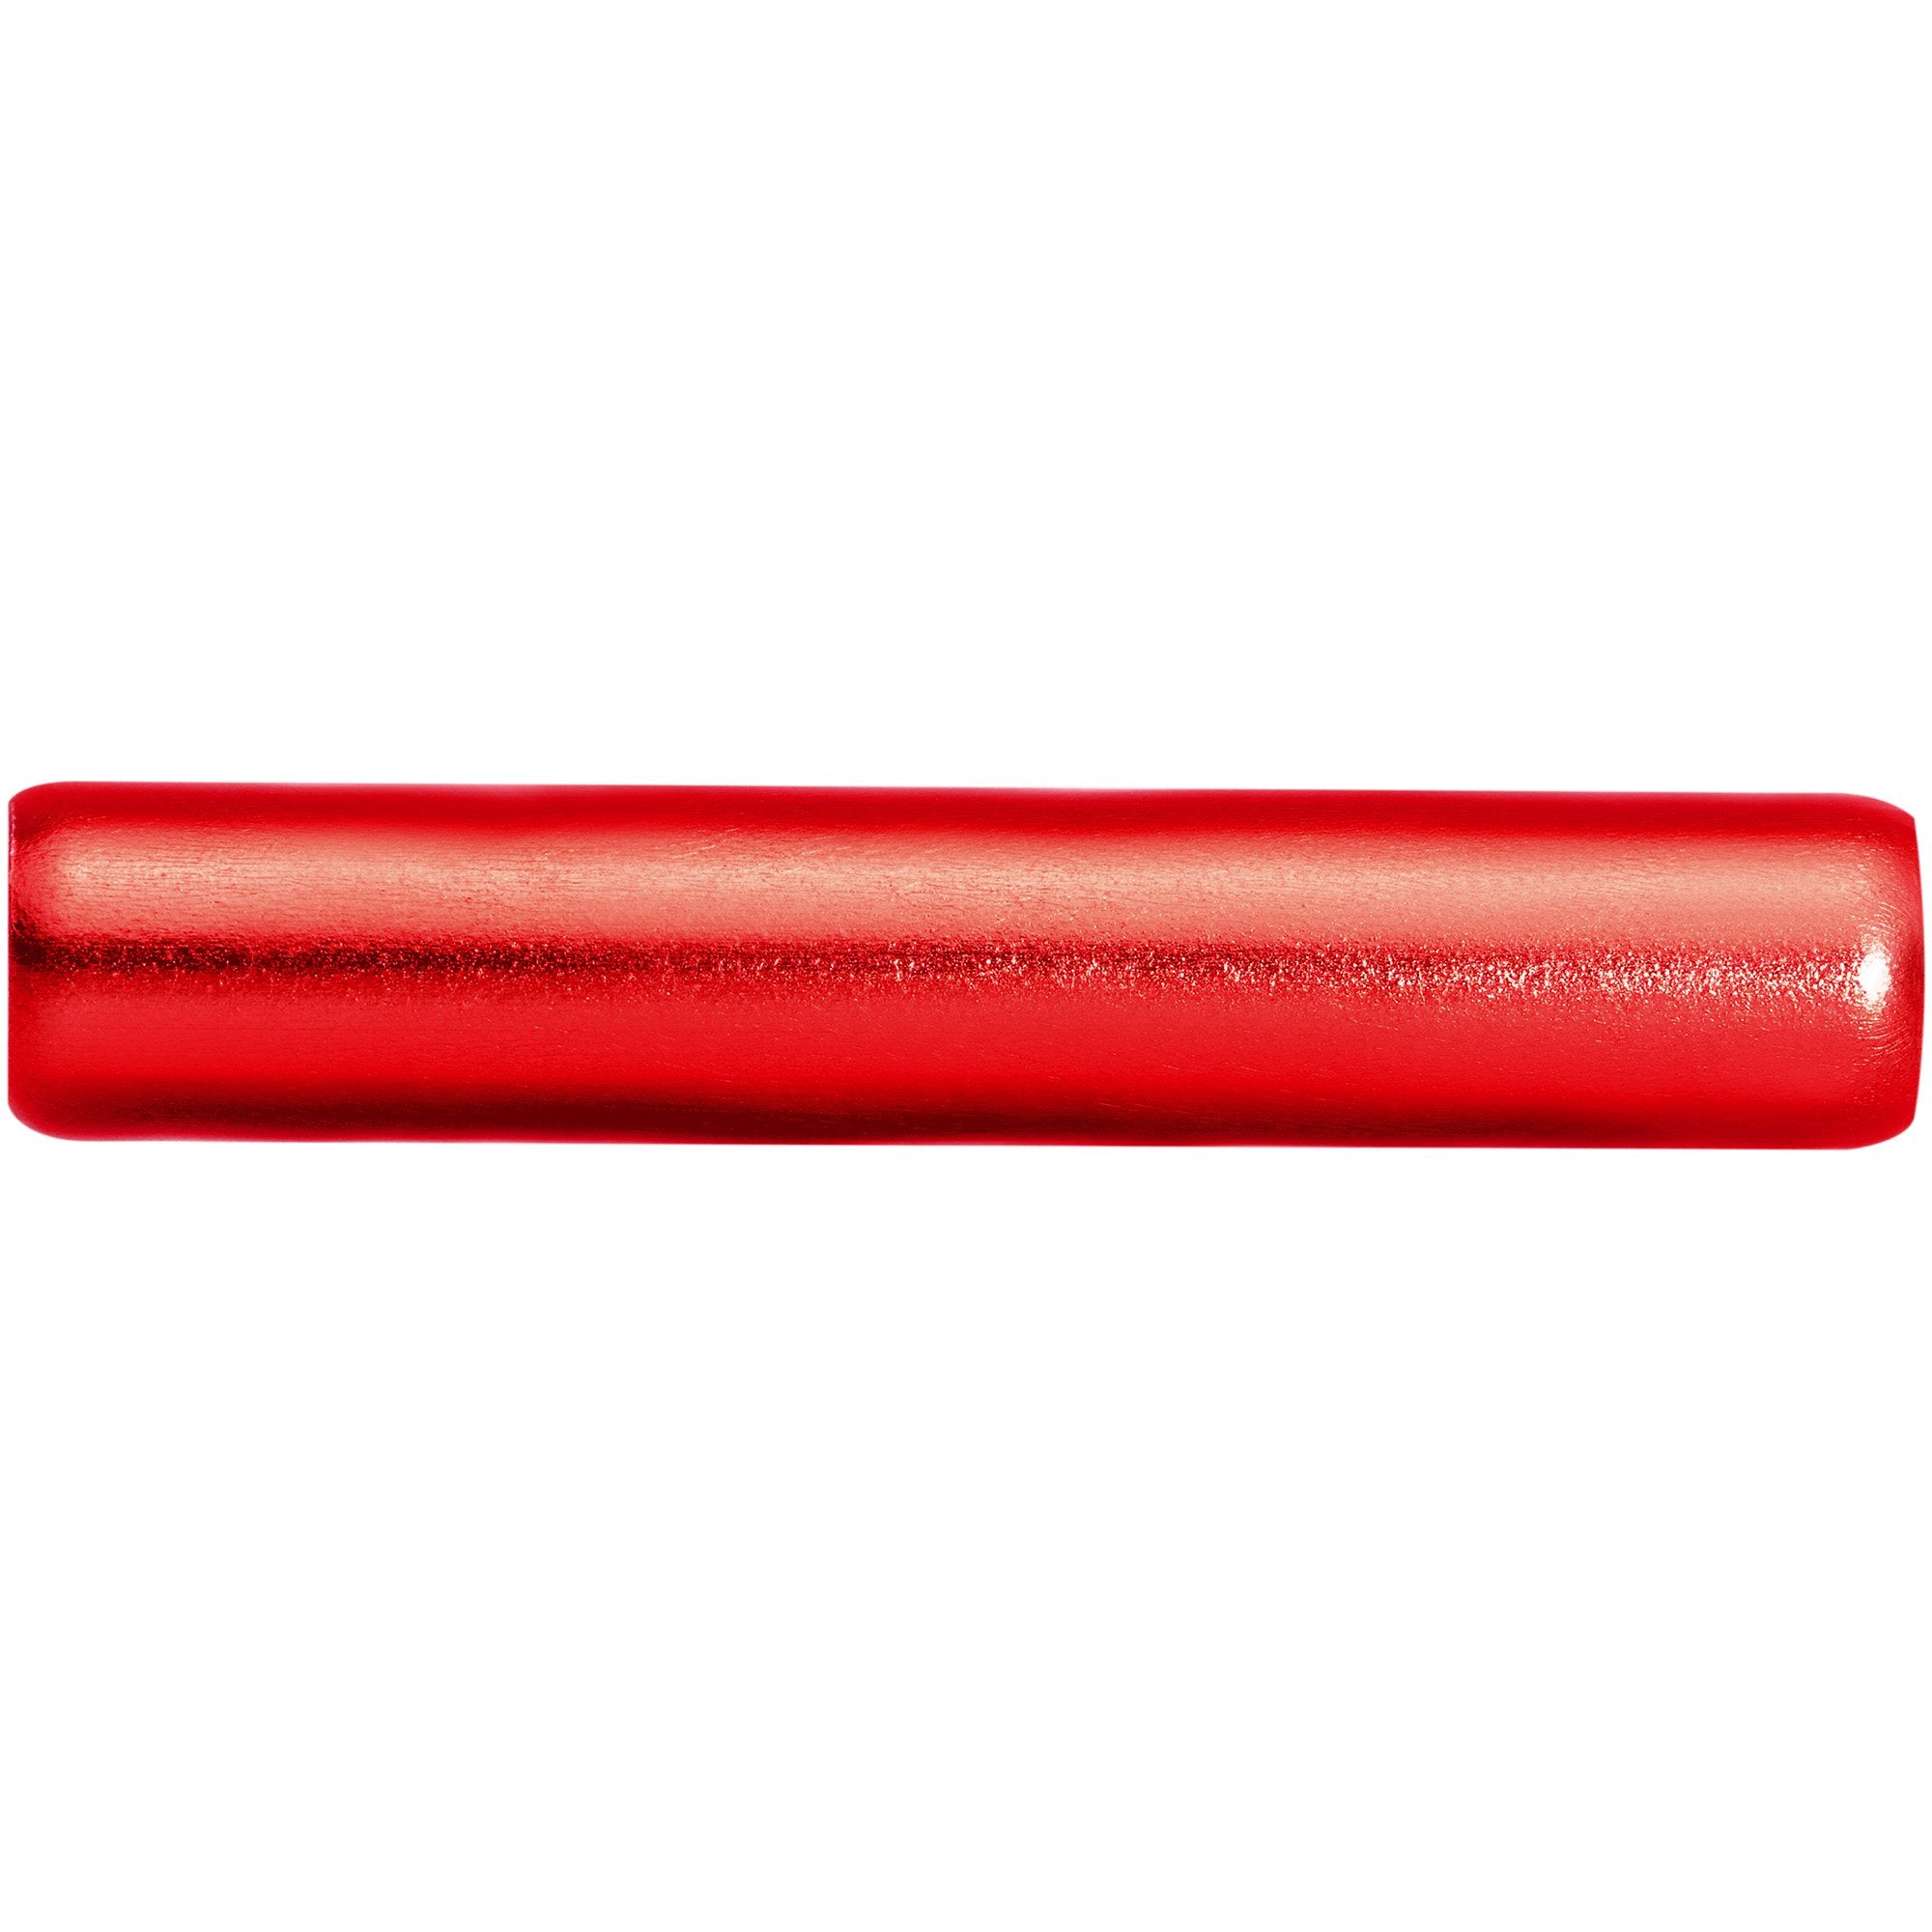 3mm to 4mm Red Aluminum Body Piercing Ball Removal Tool